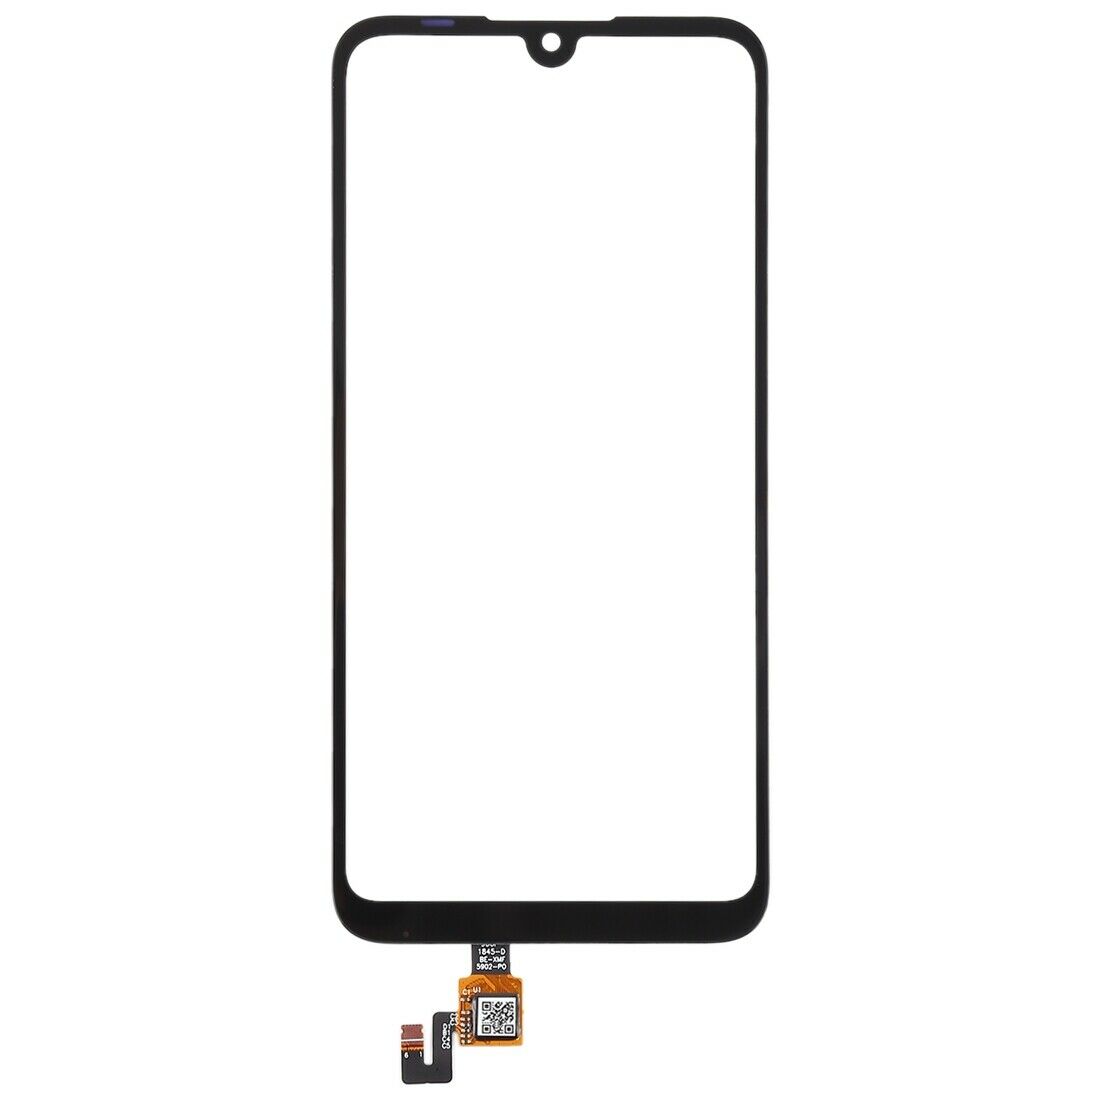 Digitizer Touch Screen Glass Replacement for Xiaomi Mi Play - Black